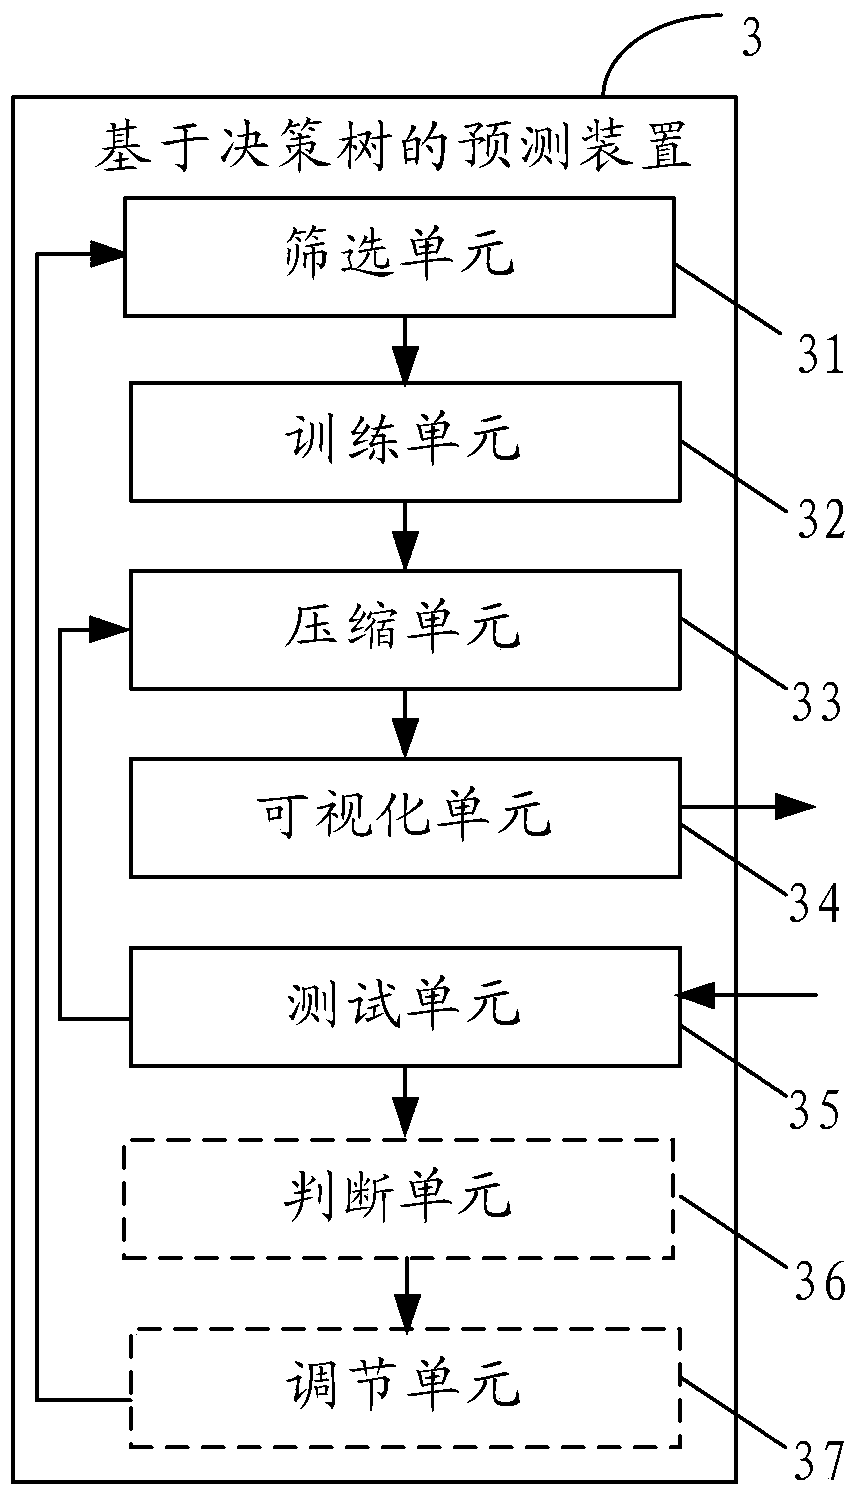 A prediction method and device based on a decision tree